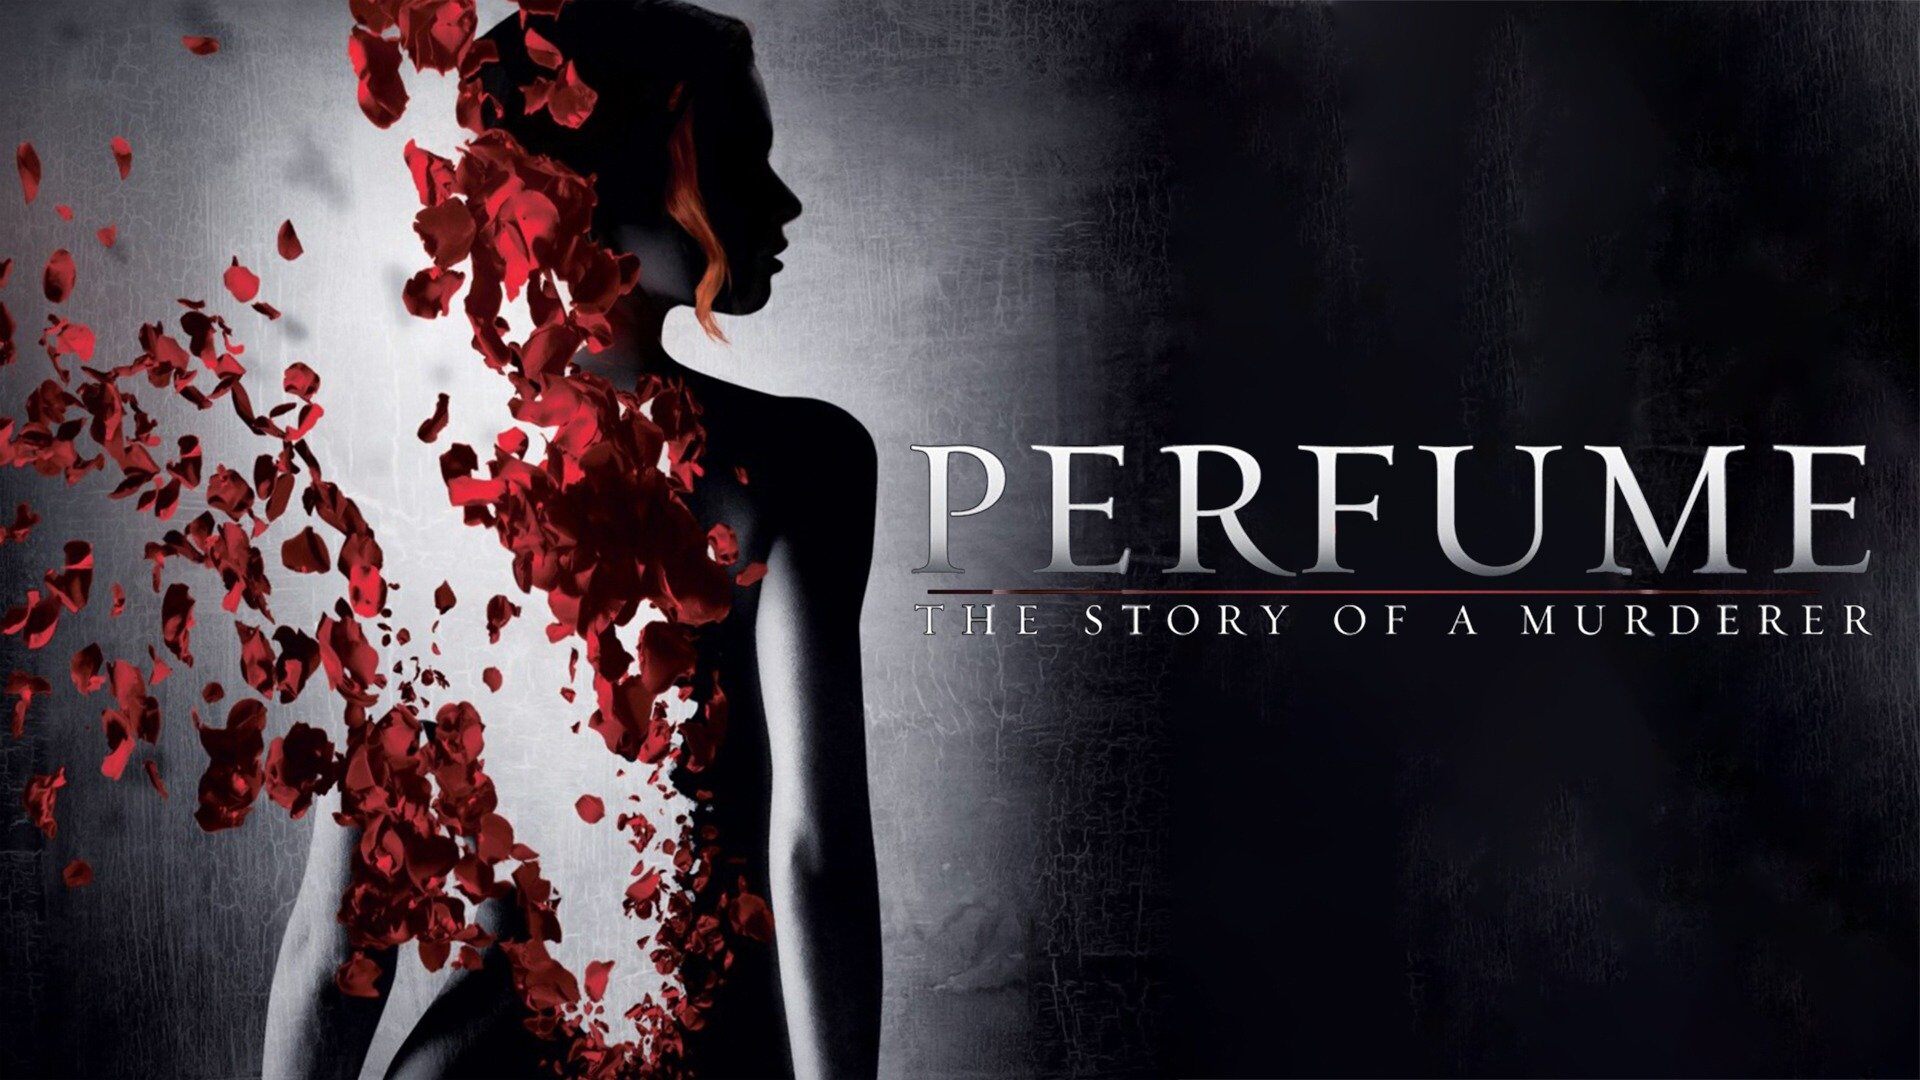 41-facts-about-the-movie-perfume-the-story-of-a-murderer